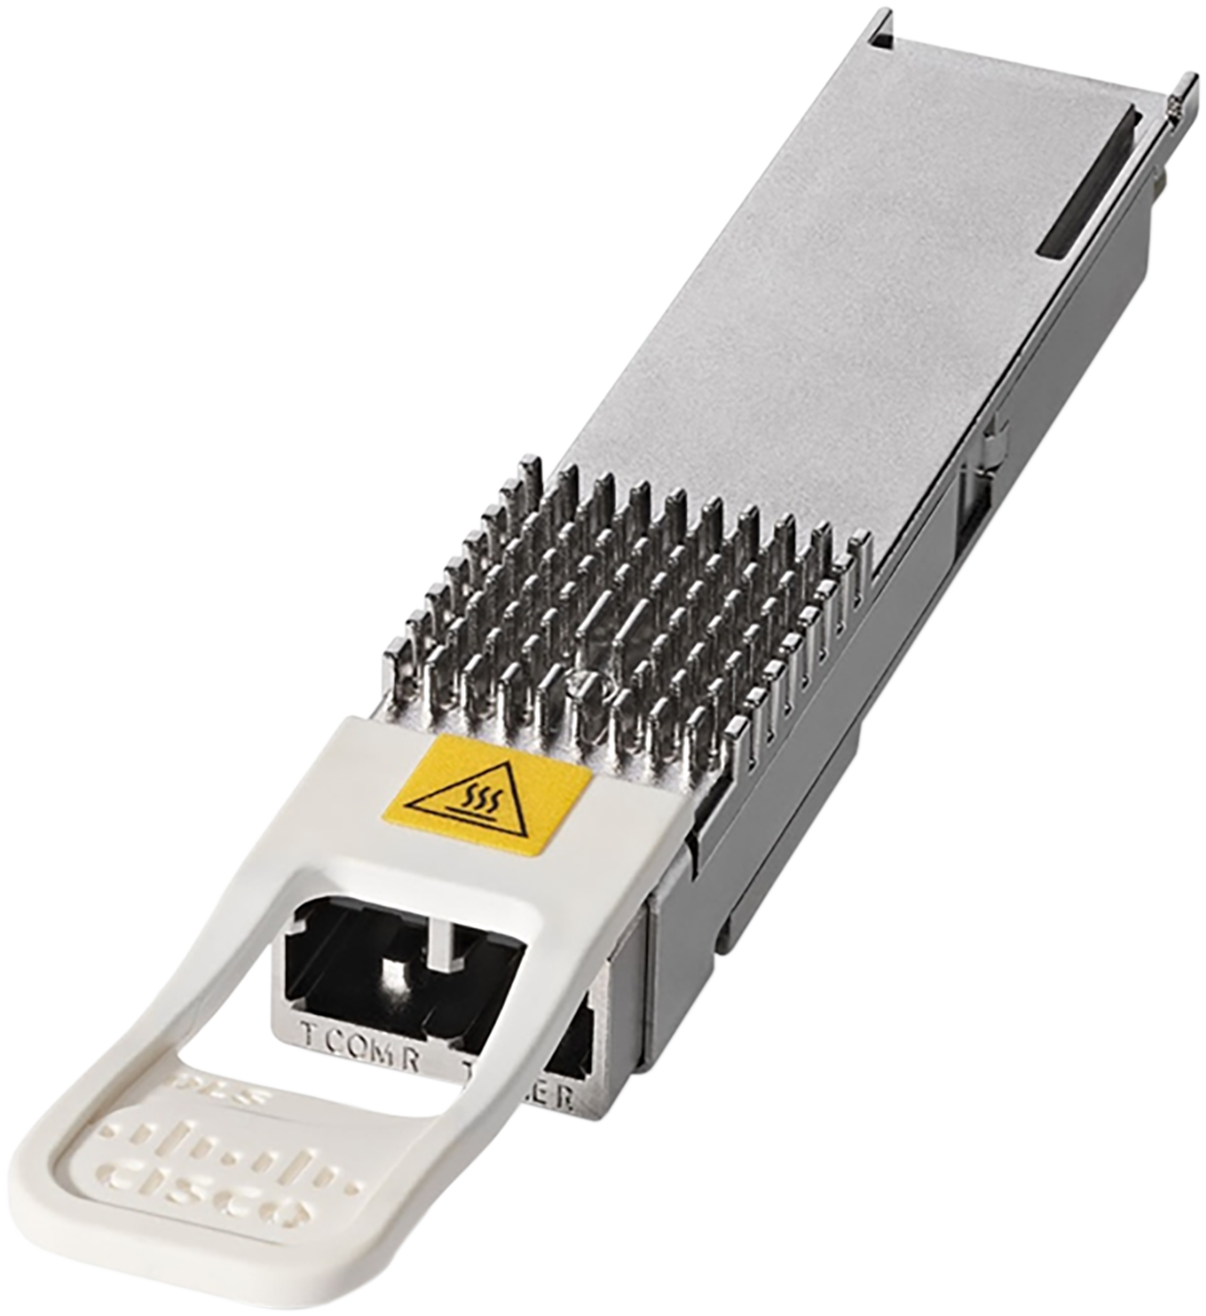 The QSFP-DD pluggable open line system